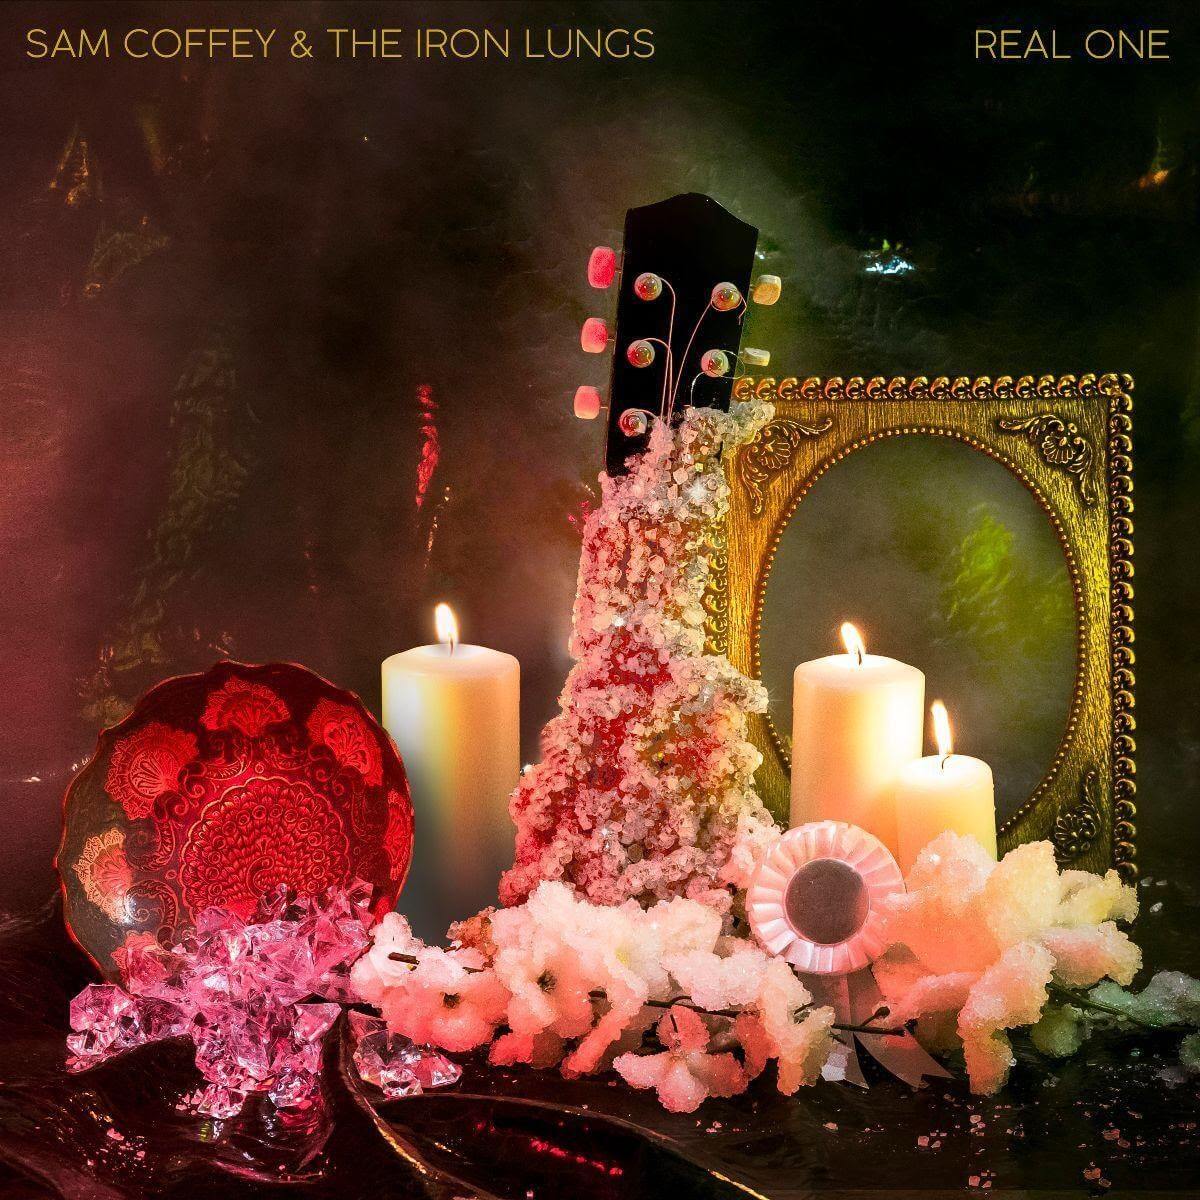 Real One by Sam Coffey & The Iron Lungs album review by Adam Williams. The band's forthcoming release drops on 2/19 via Dine Alone Records